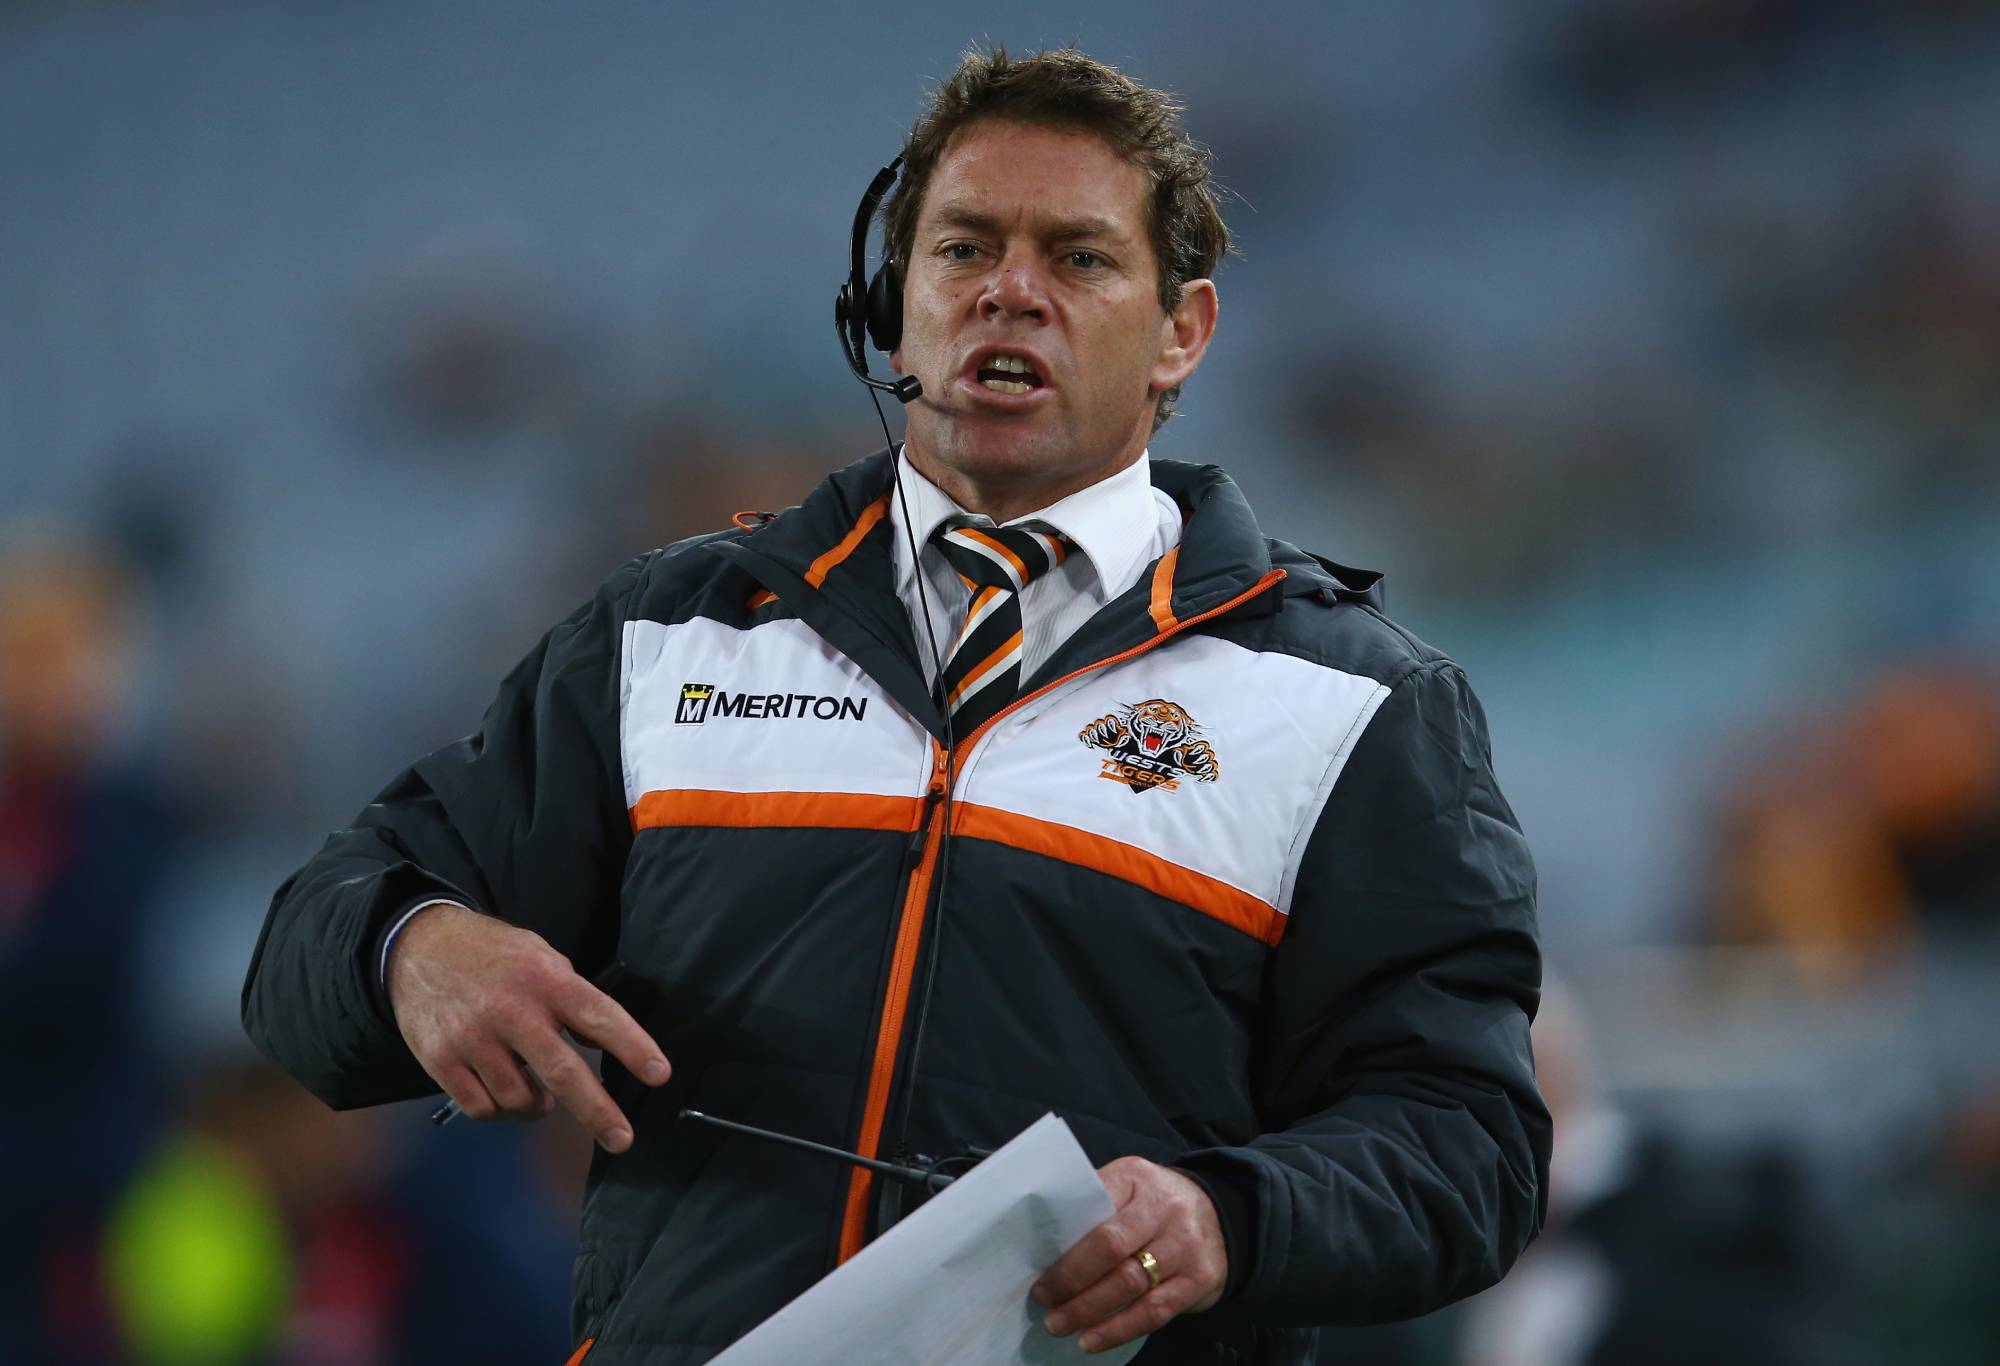 SYDNEY, AUSTRALIA - JULY 24: Tigers NYC coach Brett Kimmorley gives instructions from the bench during the round 20 NRL match between the Wests Tigers and the Sydney Roosters at ANZ Stadium on July 24, 2015 in Sydney, Australia. (Photo by Mark Kolbe/Getty Images)